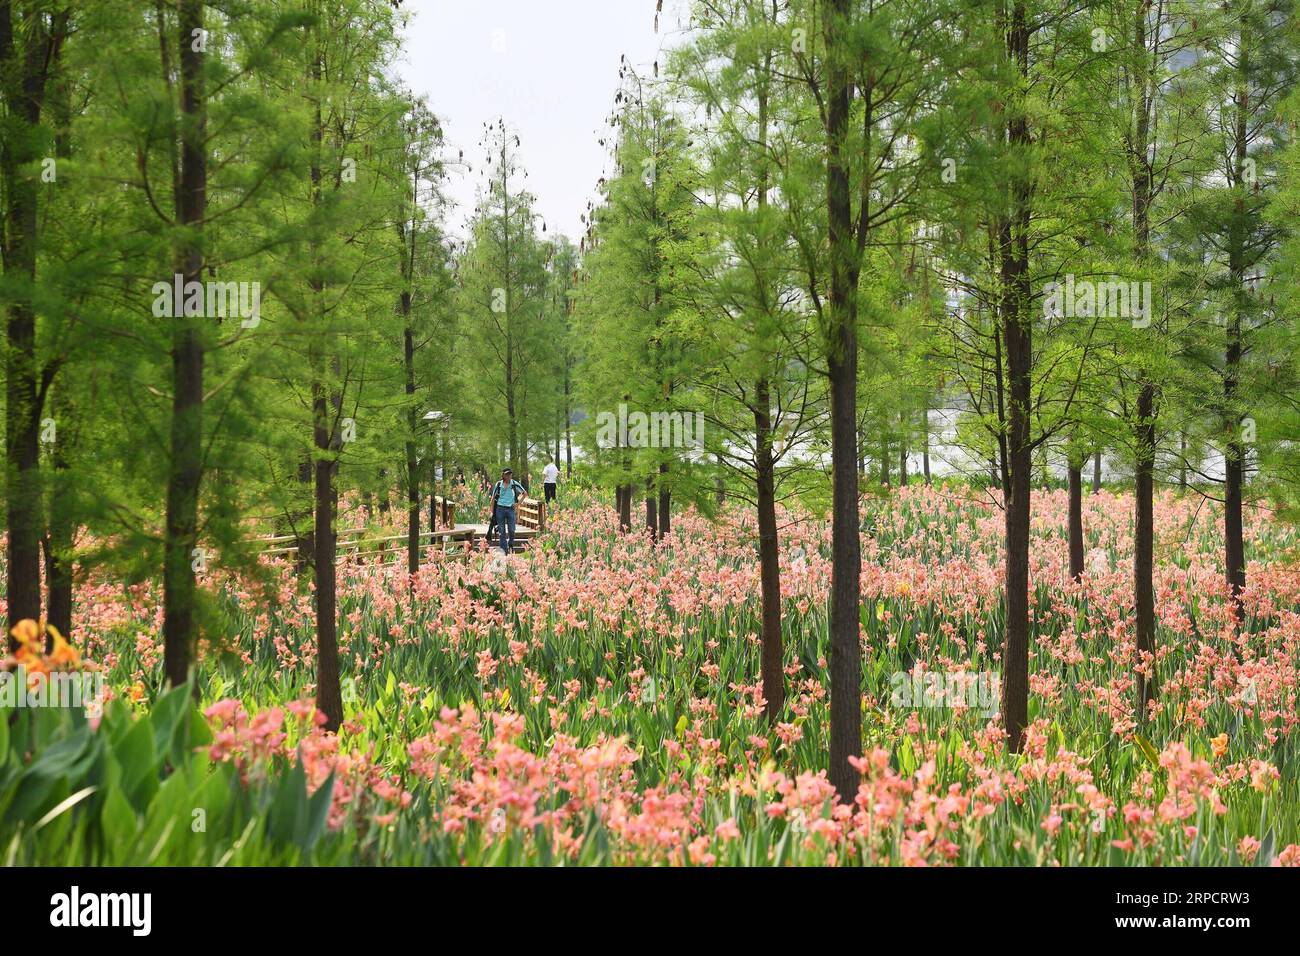 (190712) -- BEIJING, July 12, 2019 -- People visit a landscape belt along the Dongping River in Foshan, south China s Guangdong Province, April 9, 2019. Located in south China, Guangdong Province faces the South China Sea and borders Hunan and Jiangxi provinces to the north. It boasts the well-known Pearl River Delta, which is composed of three upstream rivers and a large number of islands. Due to the climate, Guangdong is famous for a diversified ecological system and environment. In recent years, by upholding the principle of green development, Guangdong has made remarkable achievements in i Stock Photo